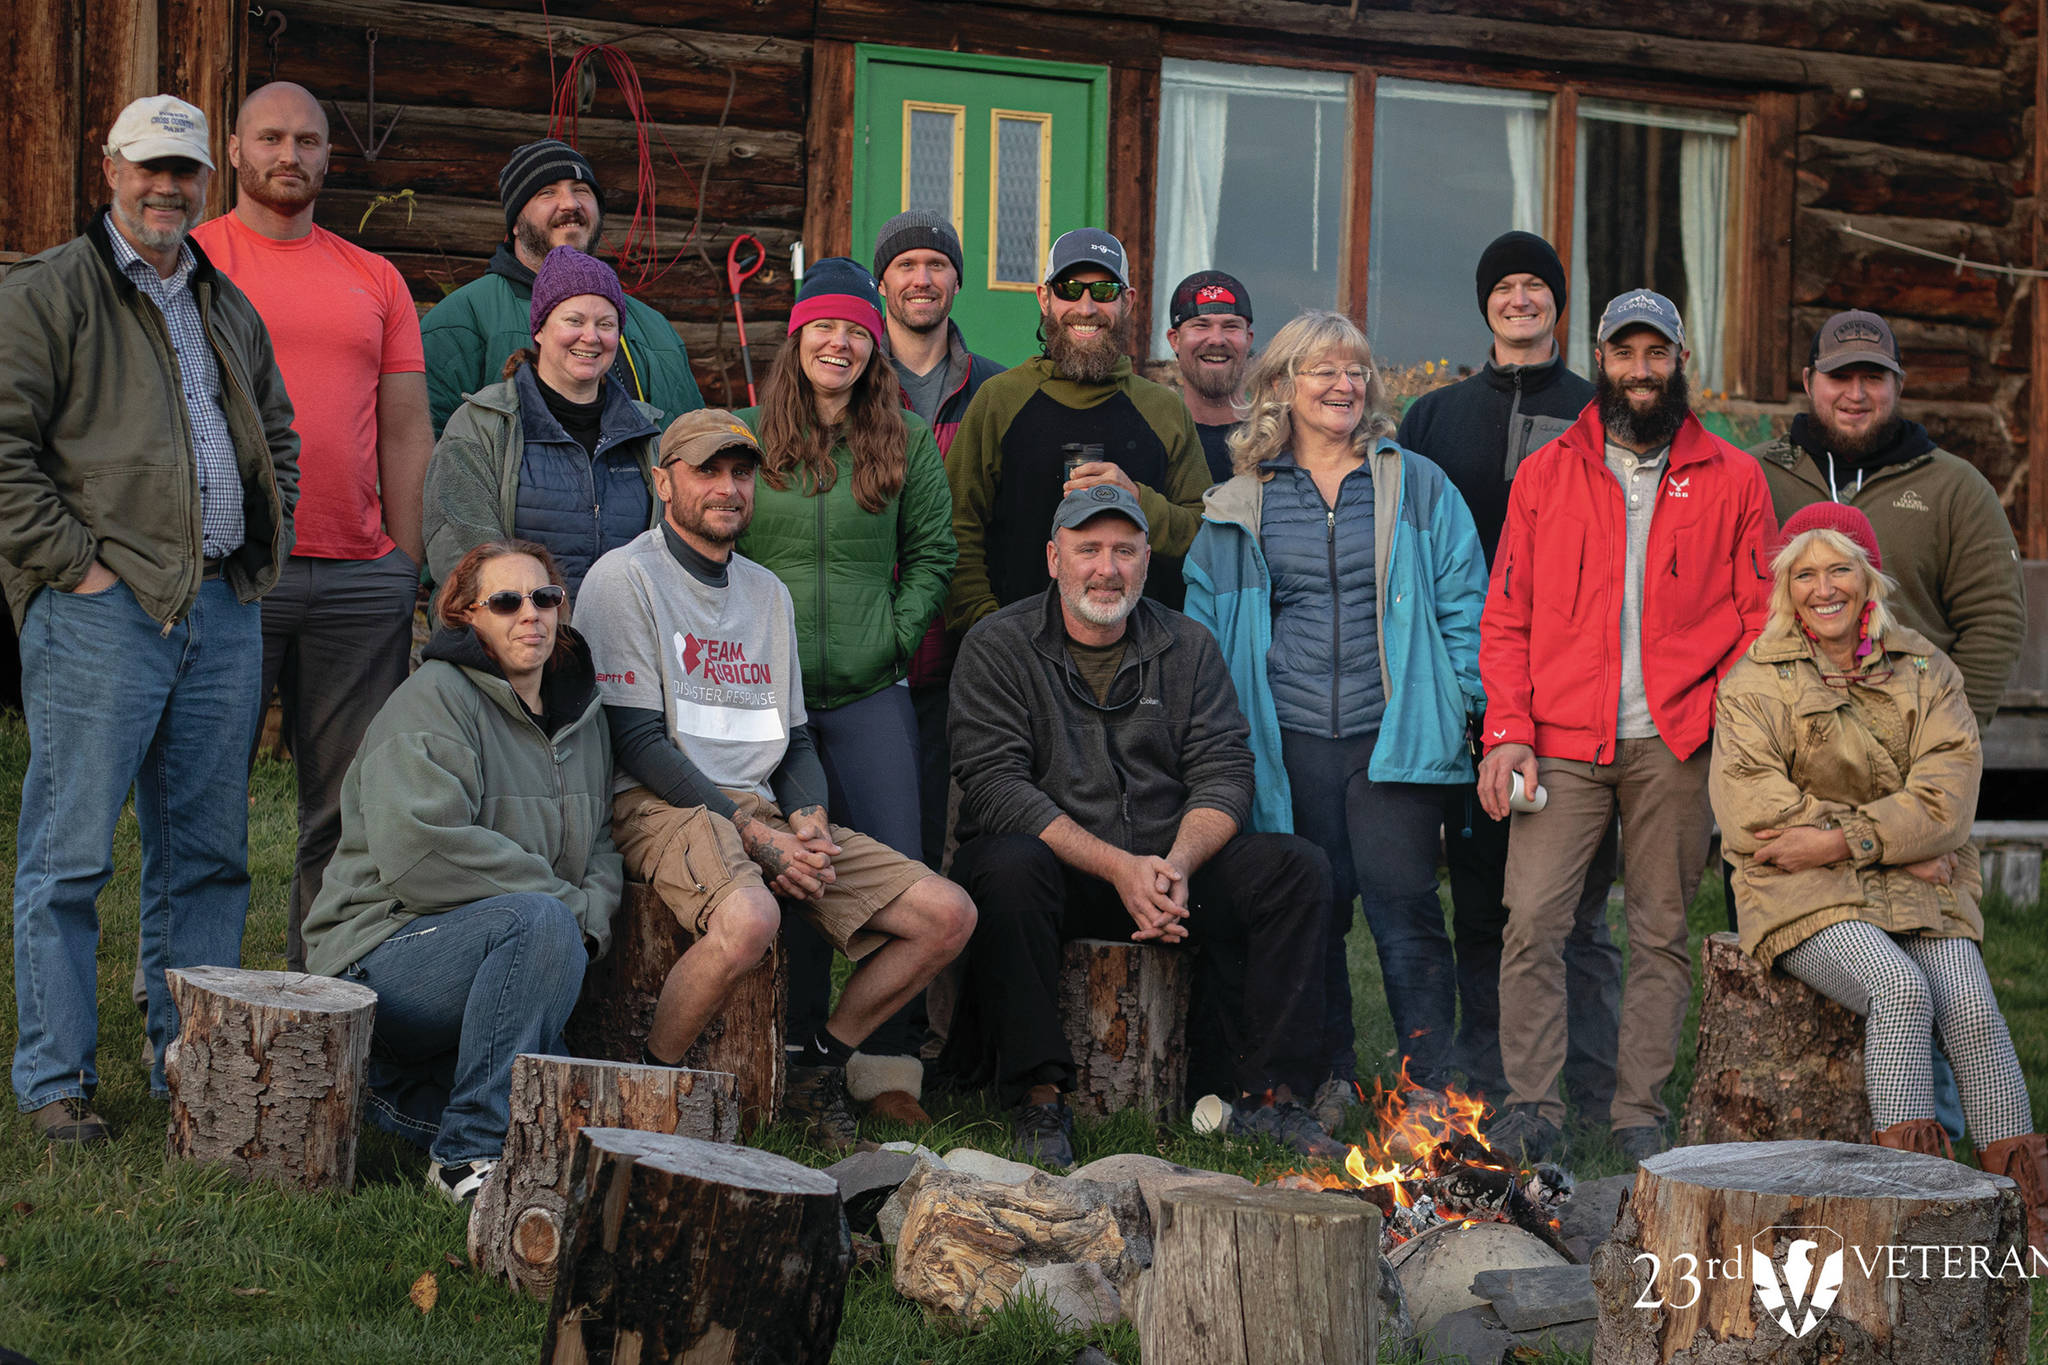 A group of veterans who participated in the 23rd Veteran trip to Homer, Alaska, pose at the Kilcher Family Homestead near Homer, Alaska, on the last day of the trip on Friday, Oct. 16, 2020. At far right, front, is Stellavera Kilcher, and third from right is Catkin Kilcher Burton, two of the Kilcher family members who participated in the visit. (Courtesy Photo / 23rd Veteran)